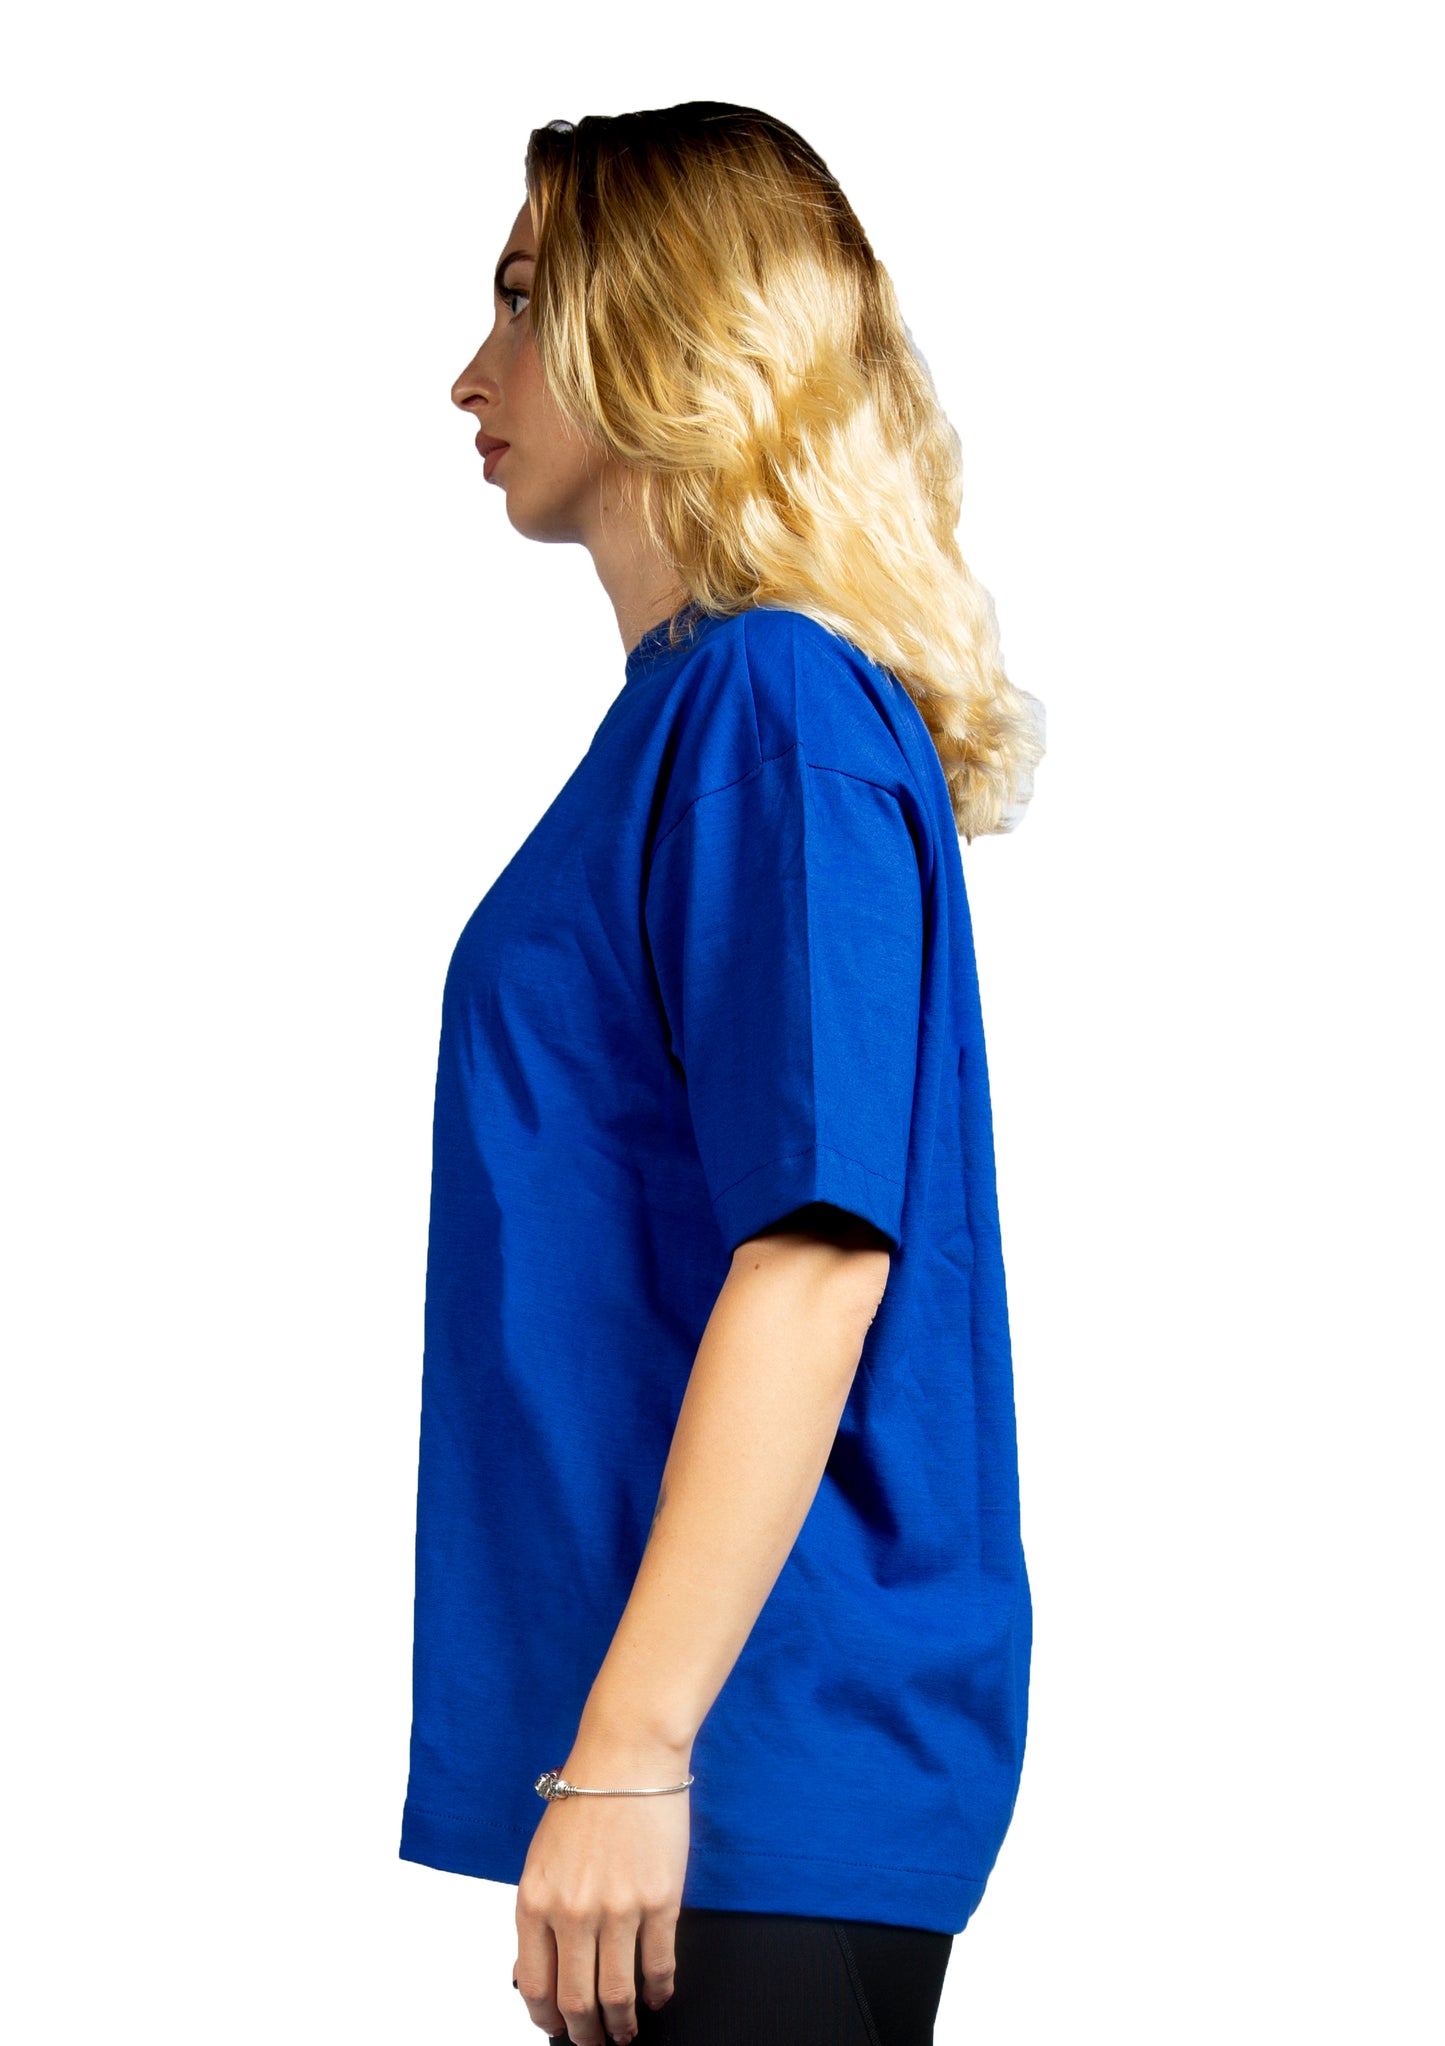 Signature Face Oversized printed Royal blue T-shirt FOR HER .